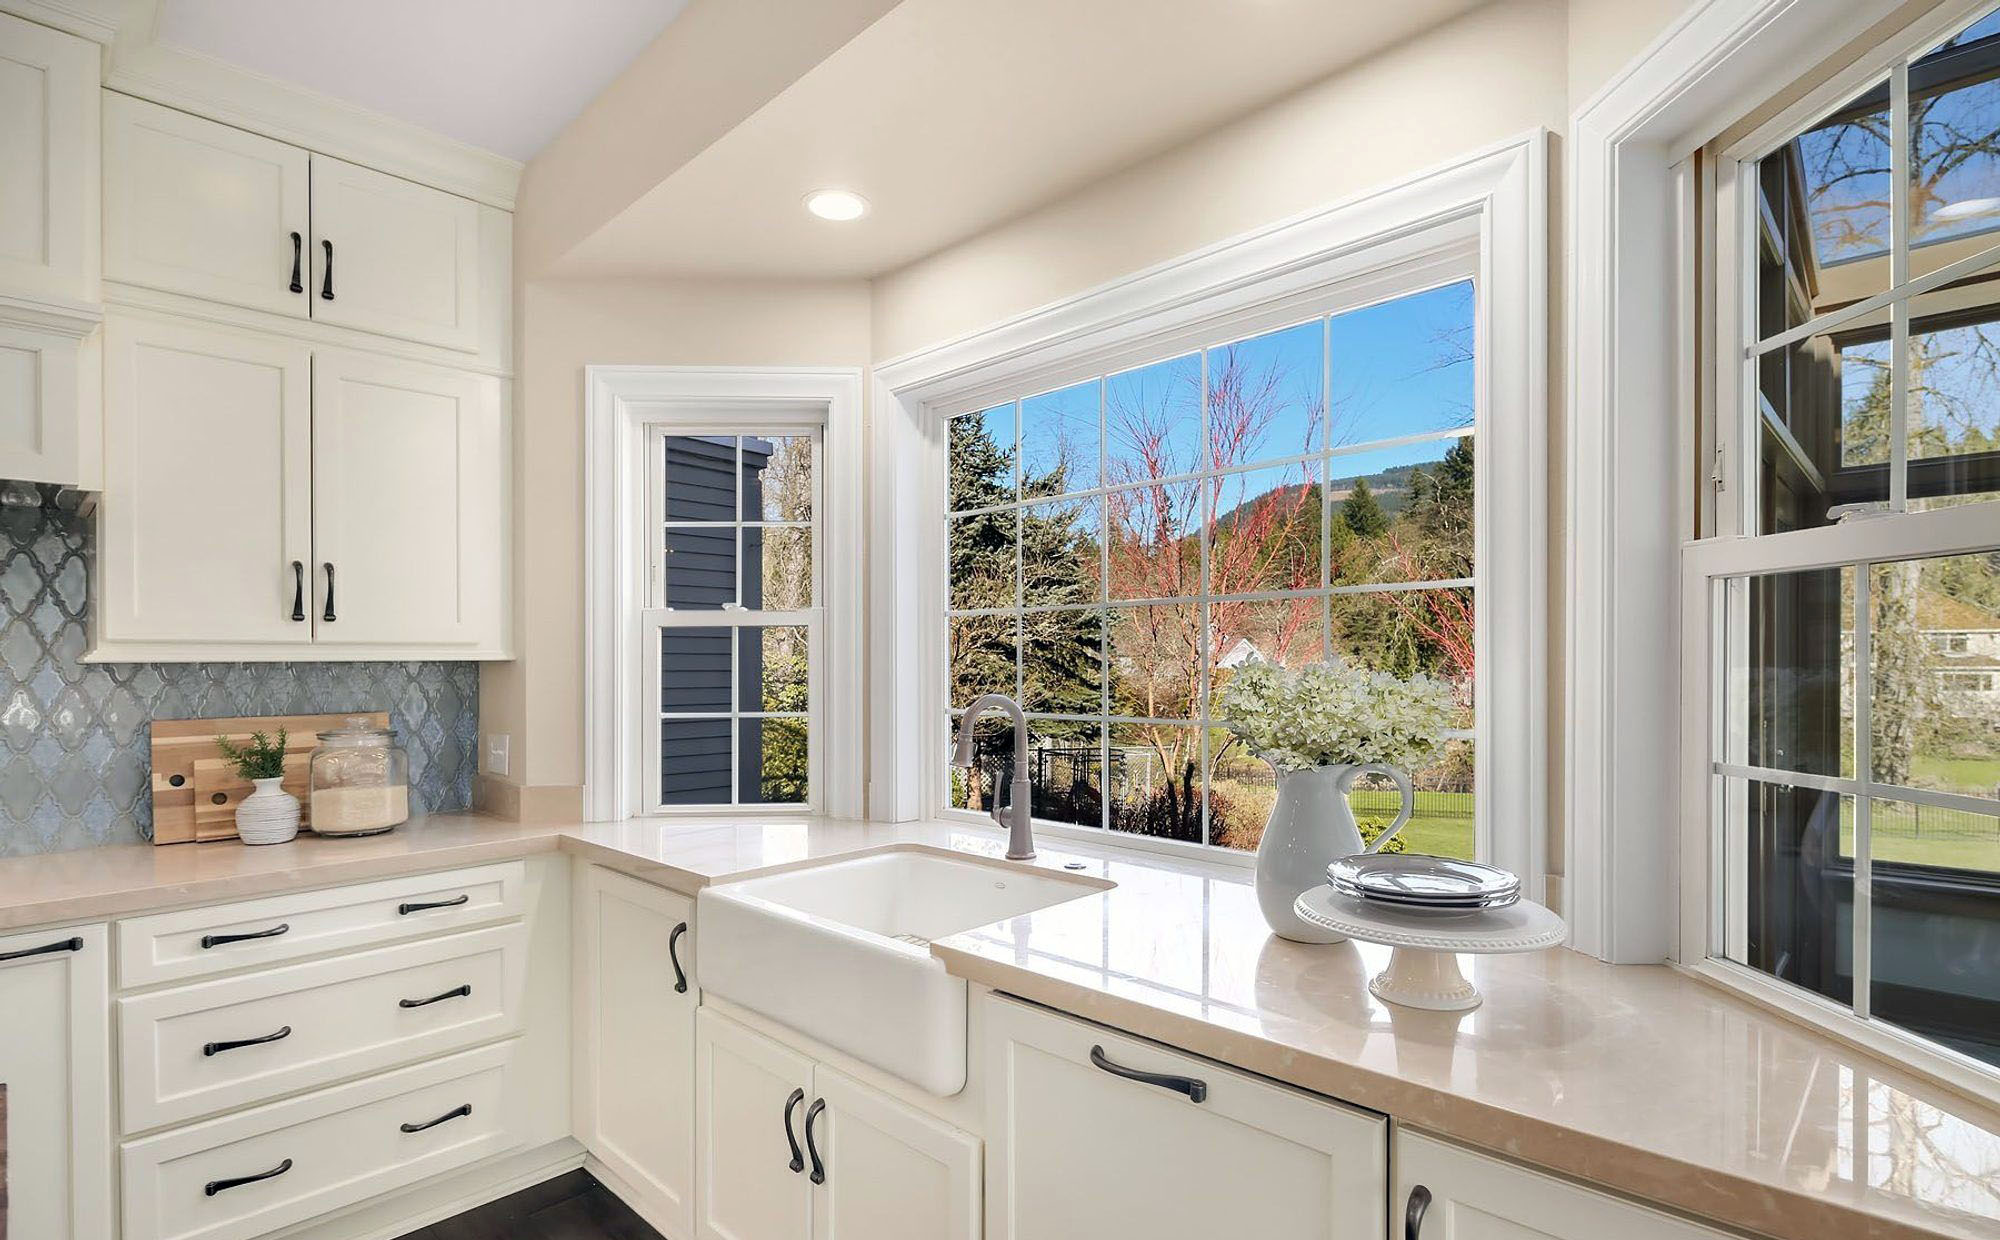 Painted white kitchen cabinets with black hardware, tan stone countertops & a white enamel farm house sink.